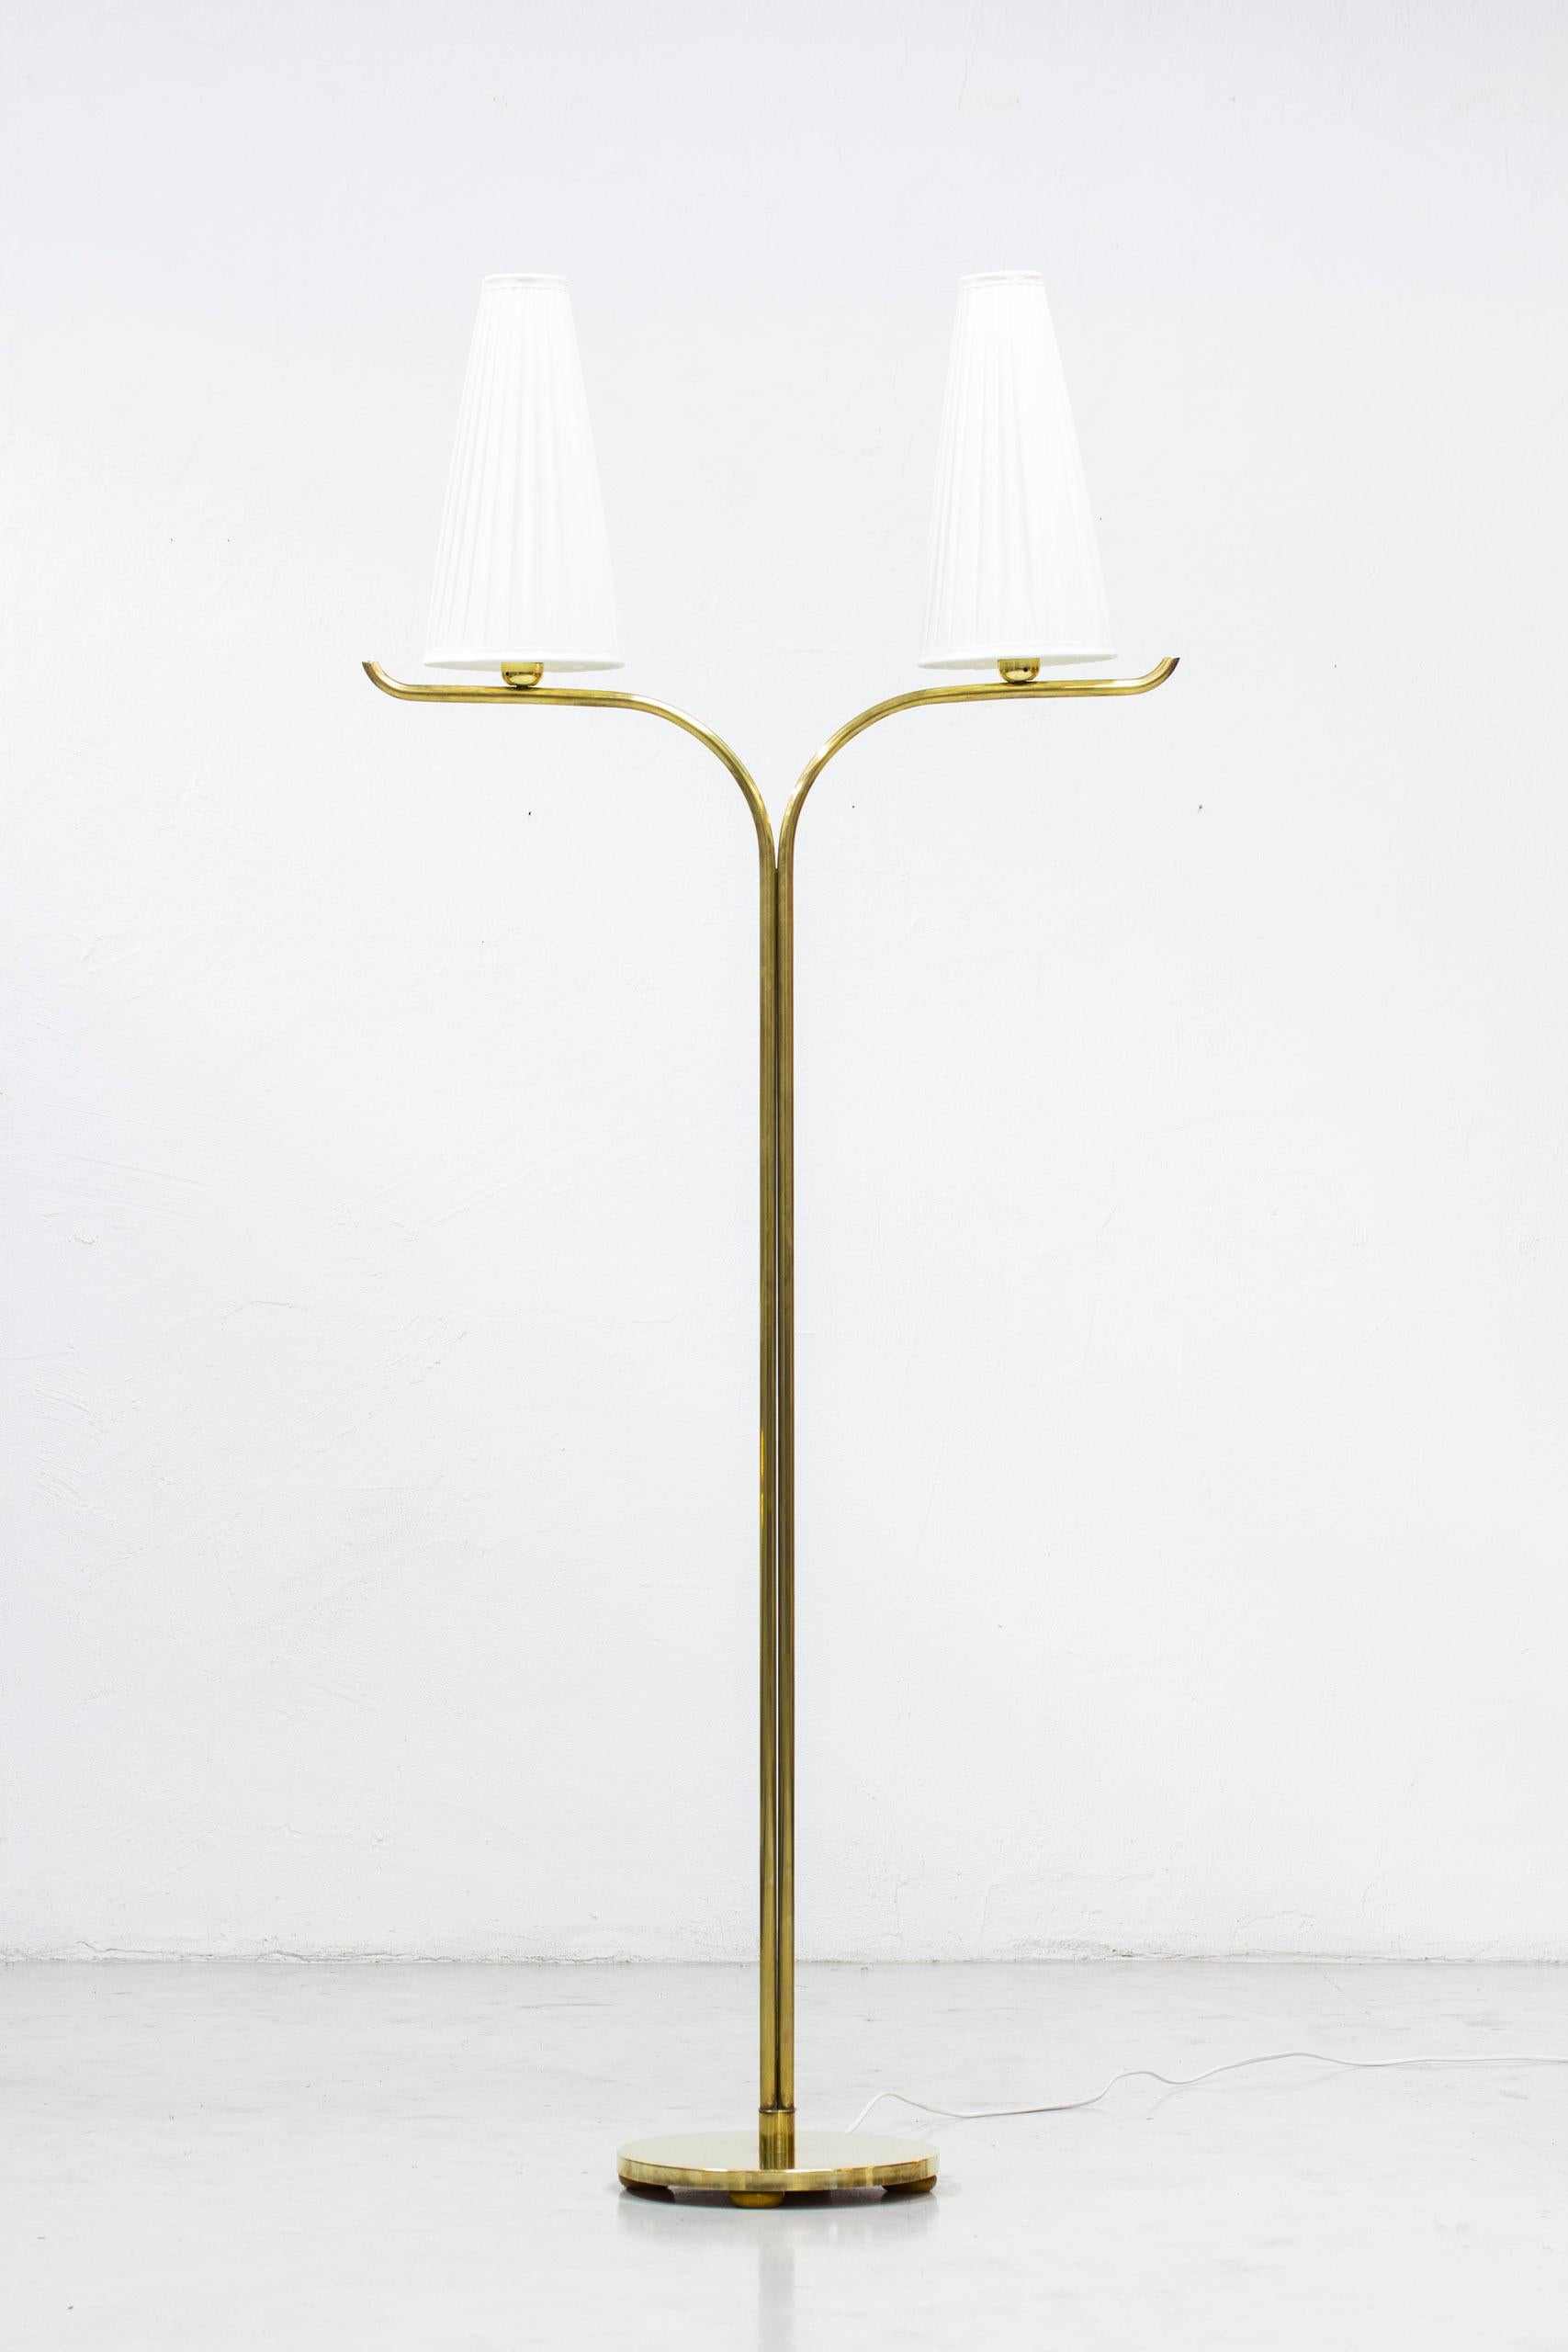 Swedish modern floor lamp by Gustaf Axel Berg. Produced by his own workshop G. A berg & Co in Stockholm, Sweden in the 1940s. Made from polished brass and shades with new hand sewn chintz fabric in creme white. Light switch on the chord. Very good